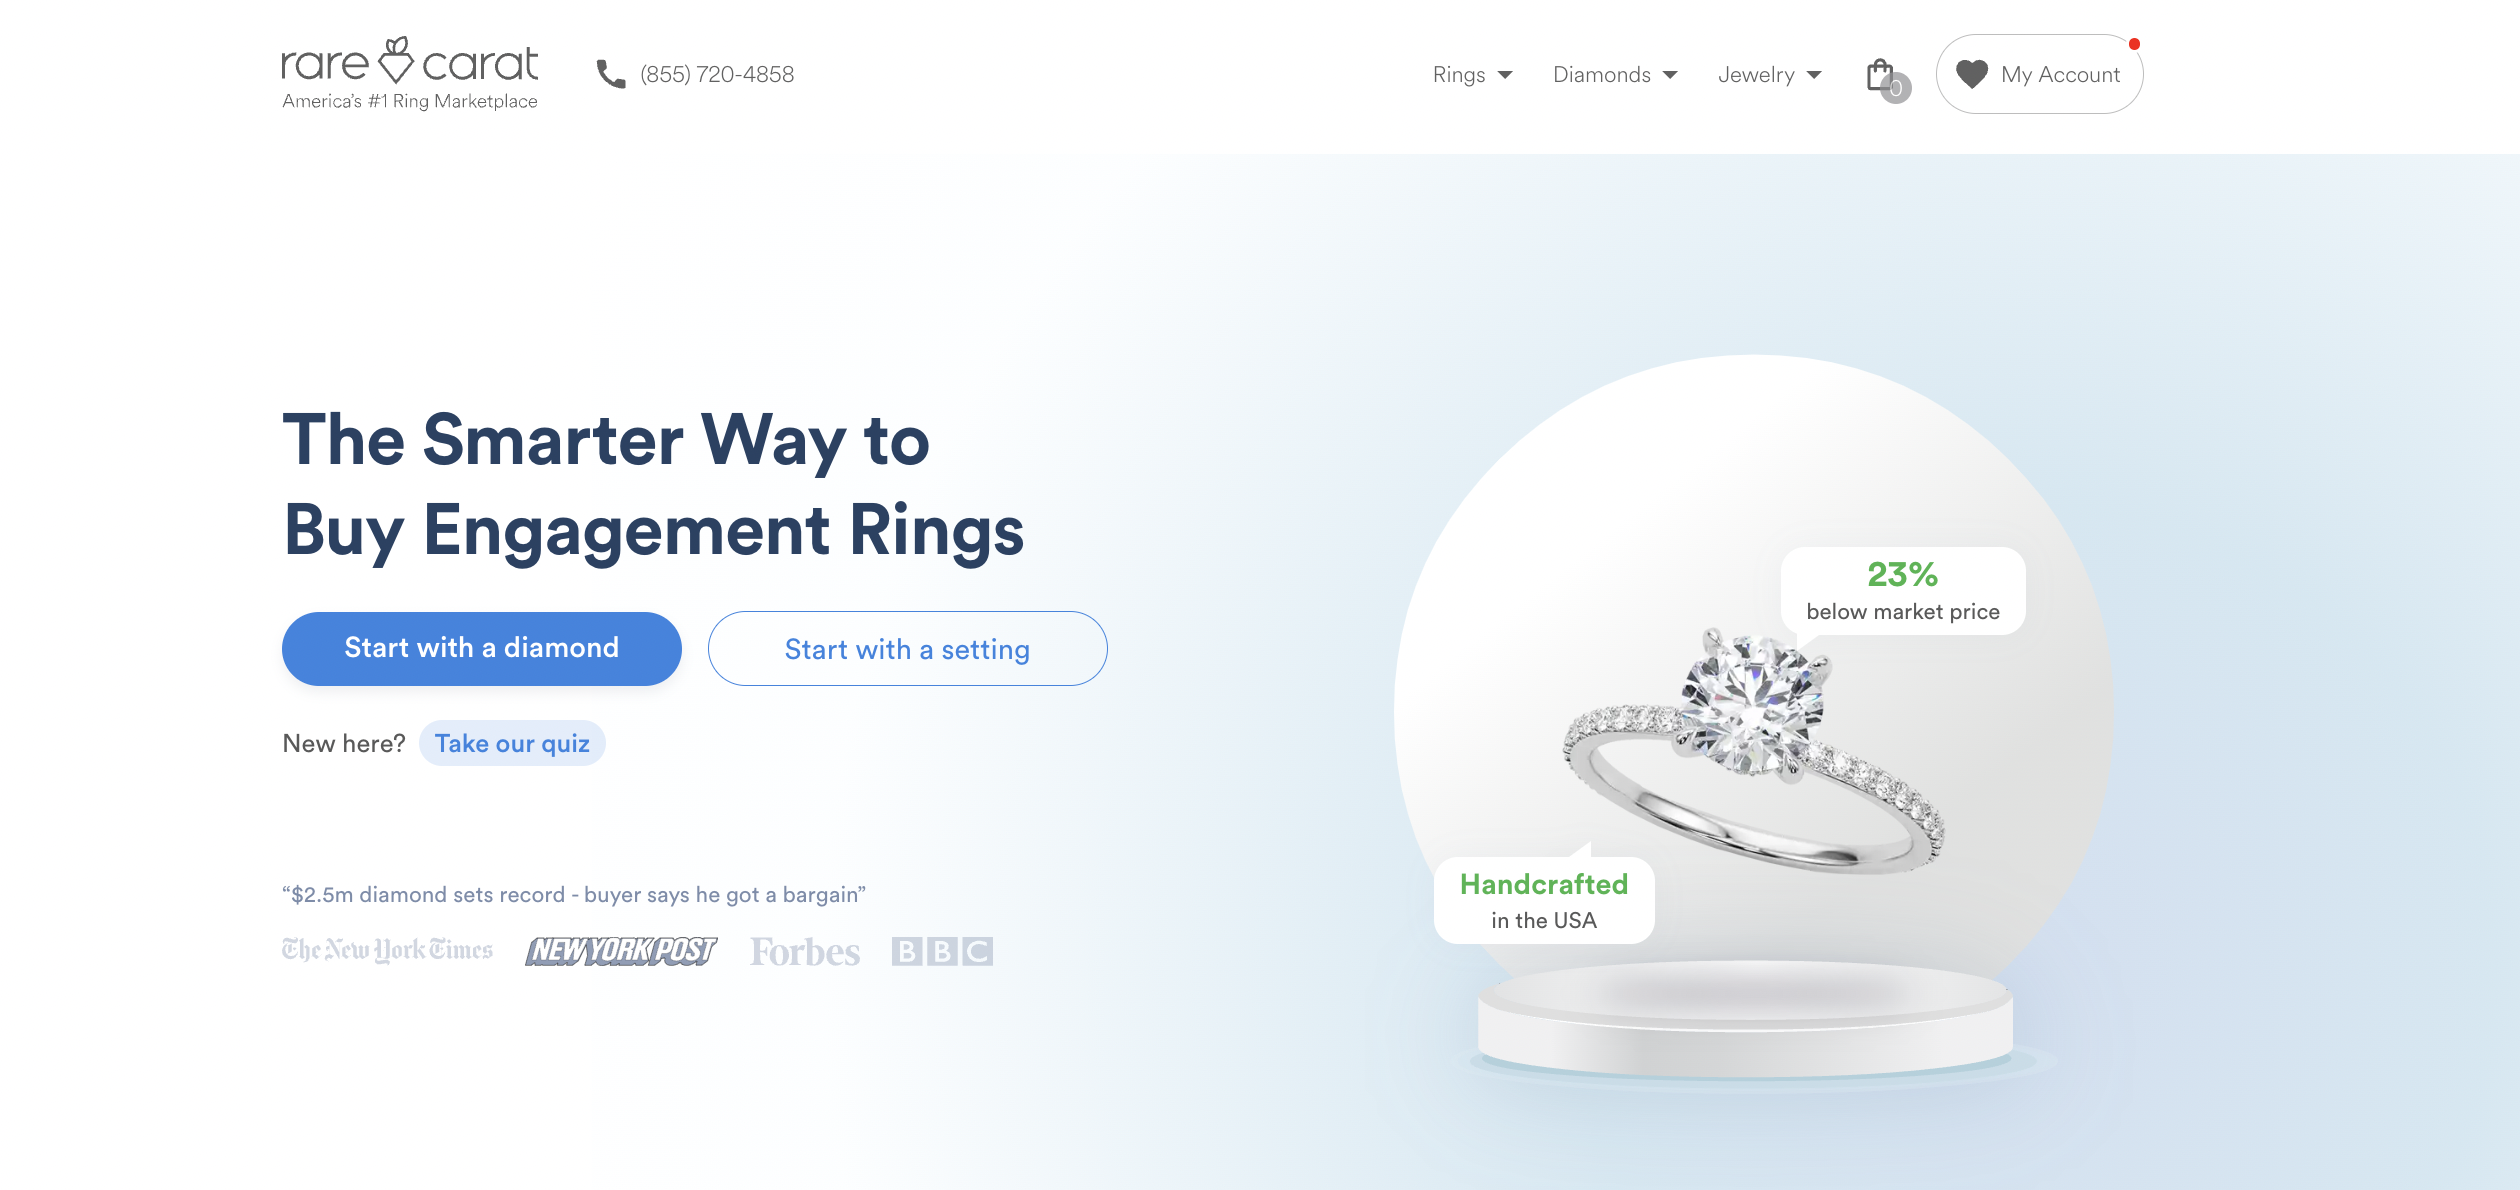 The Smarter Way to Buy Engagement Rings